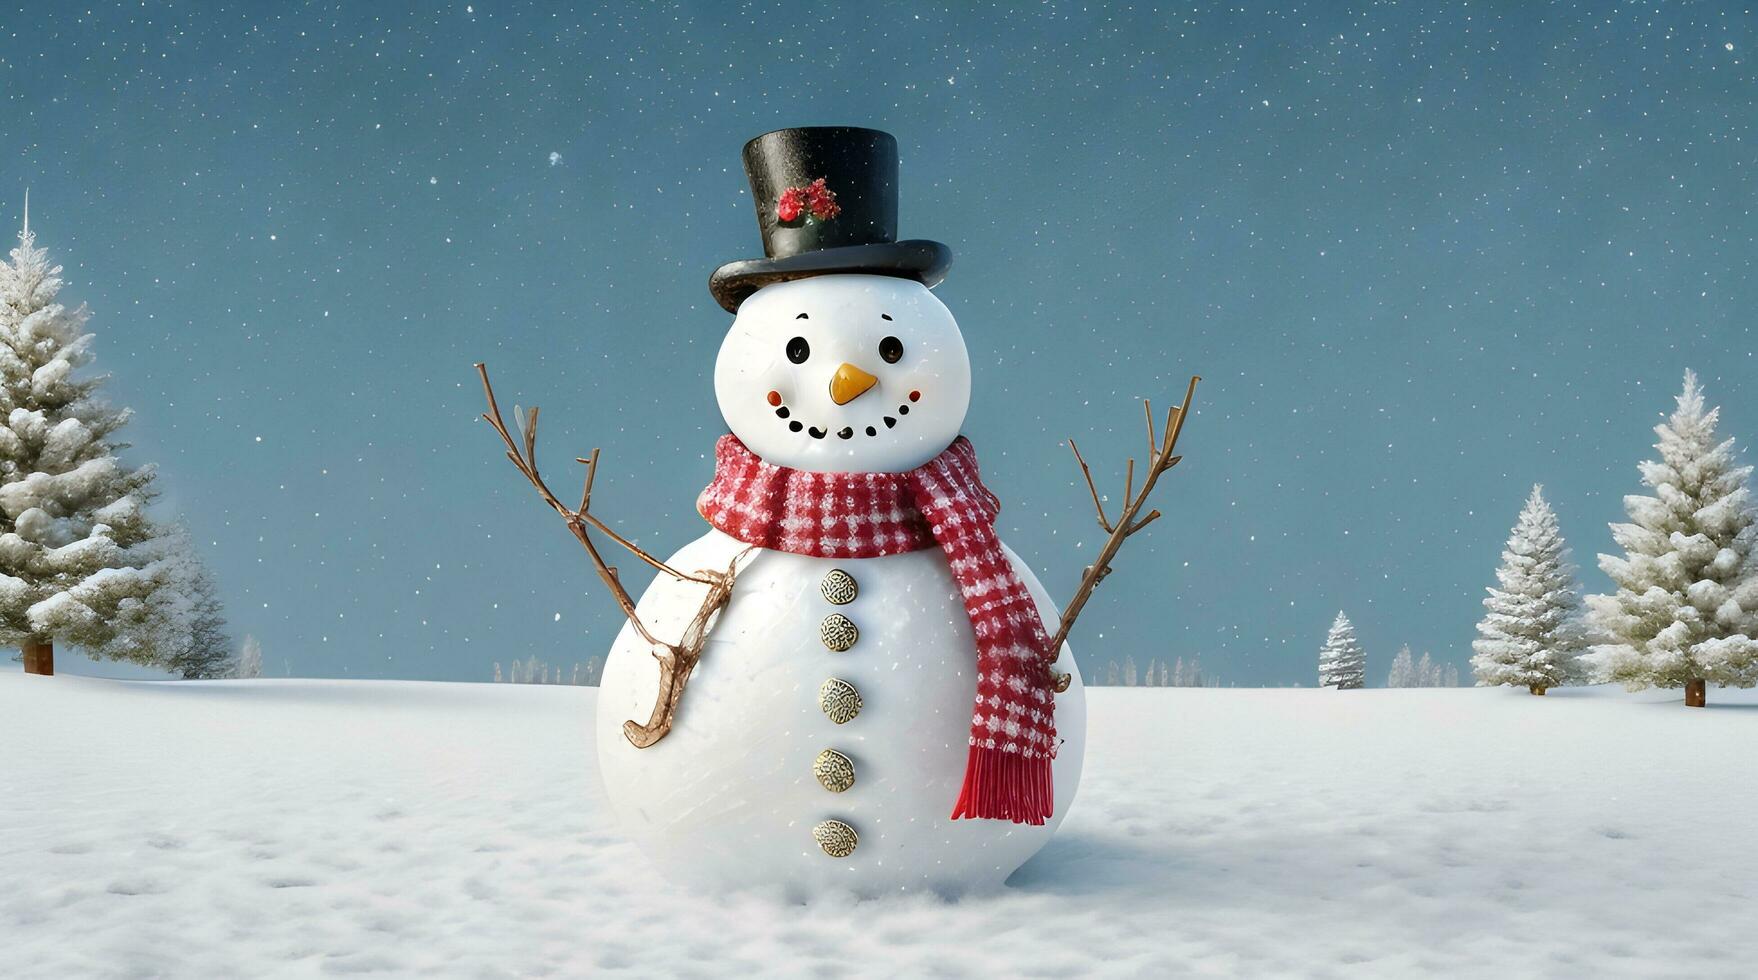 festive Christmas background with snowman photo